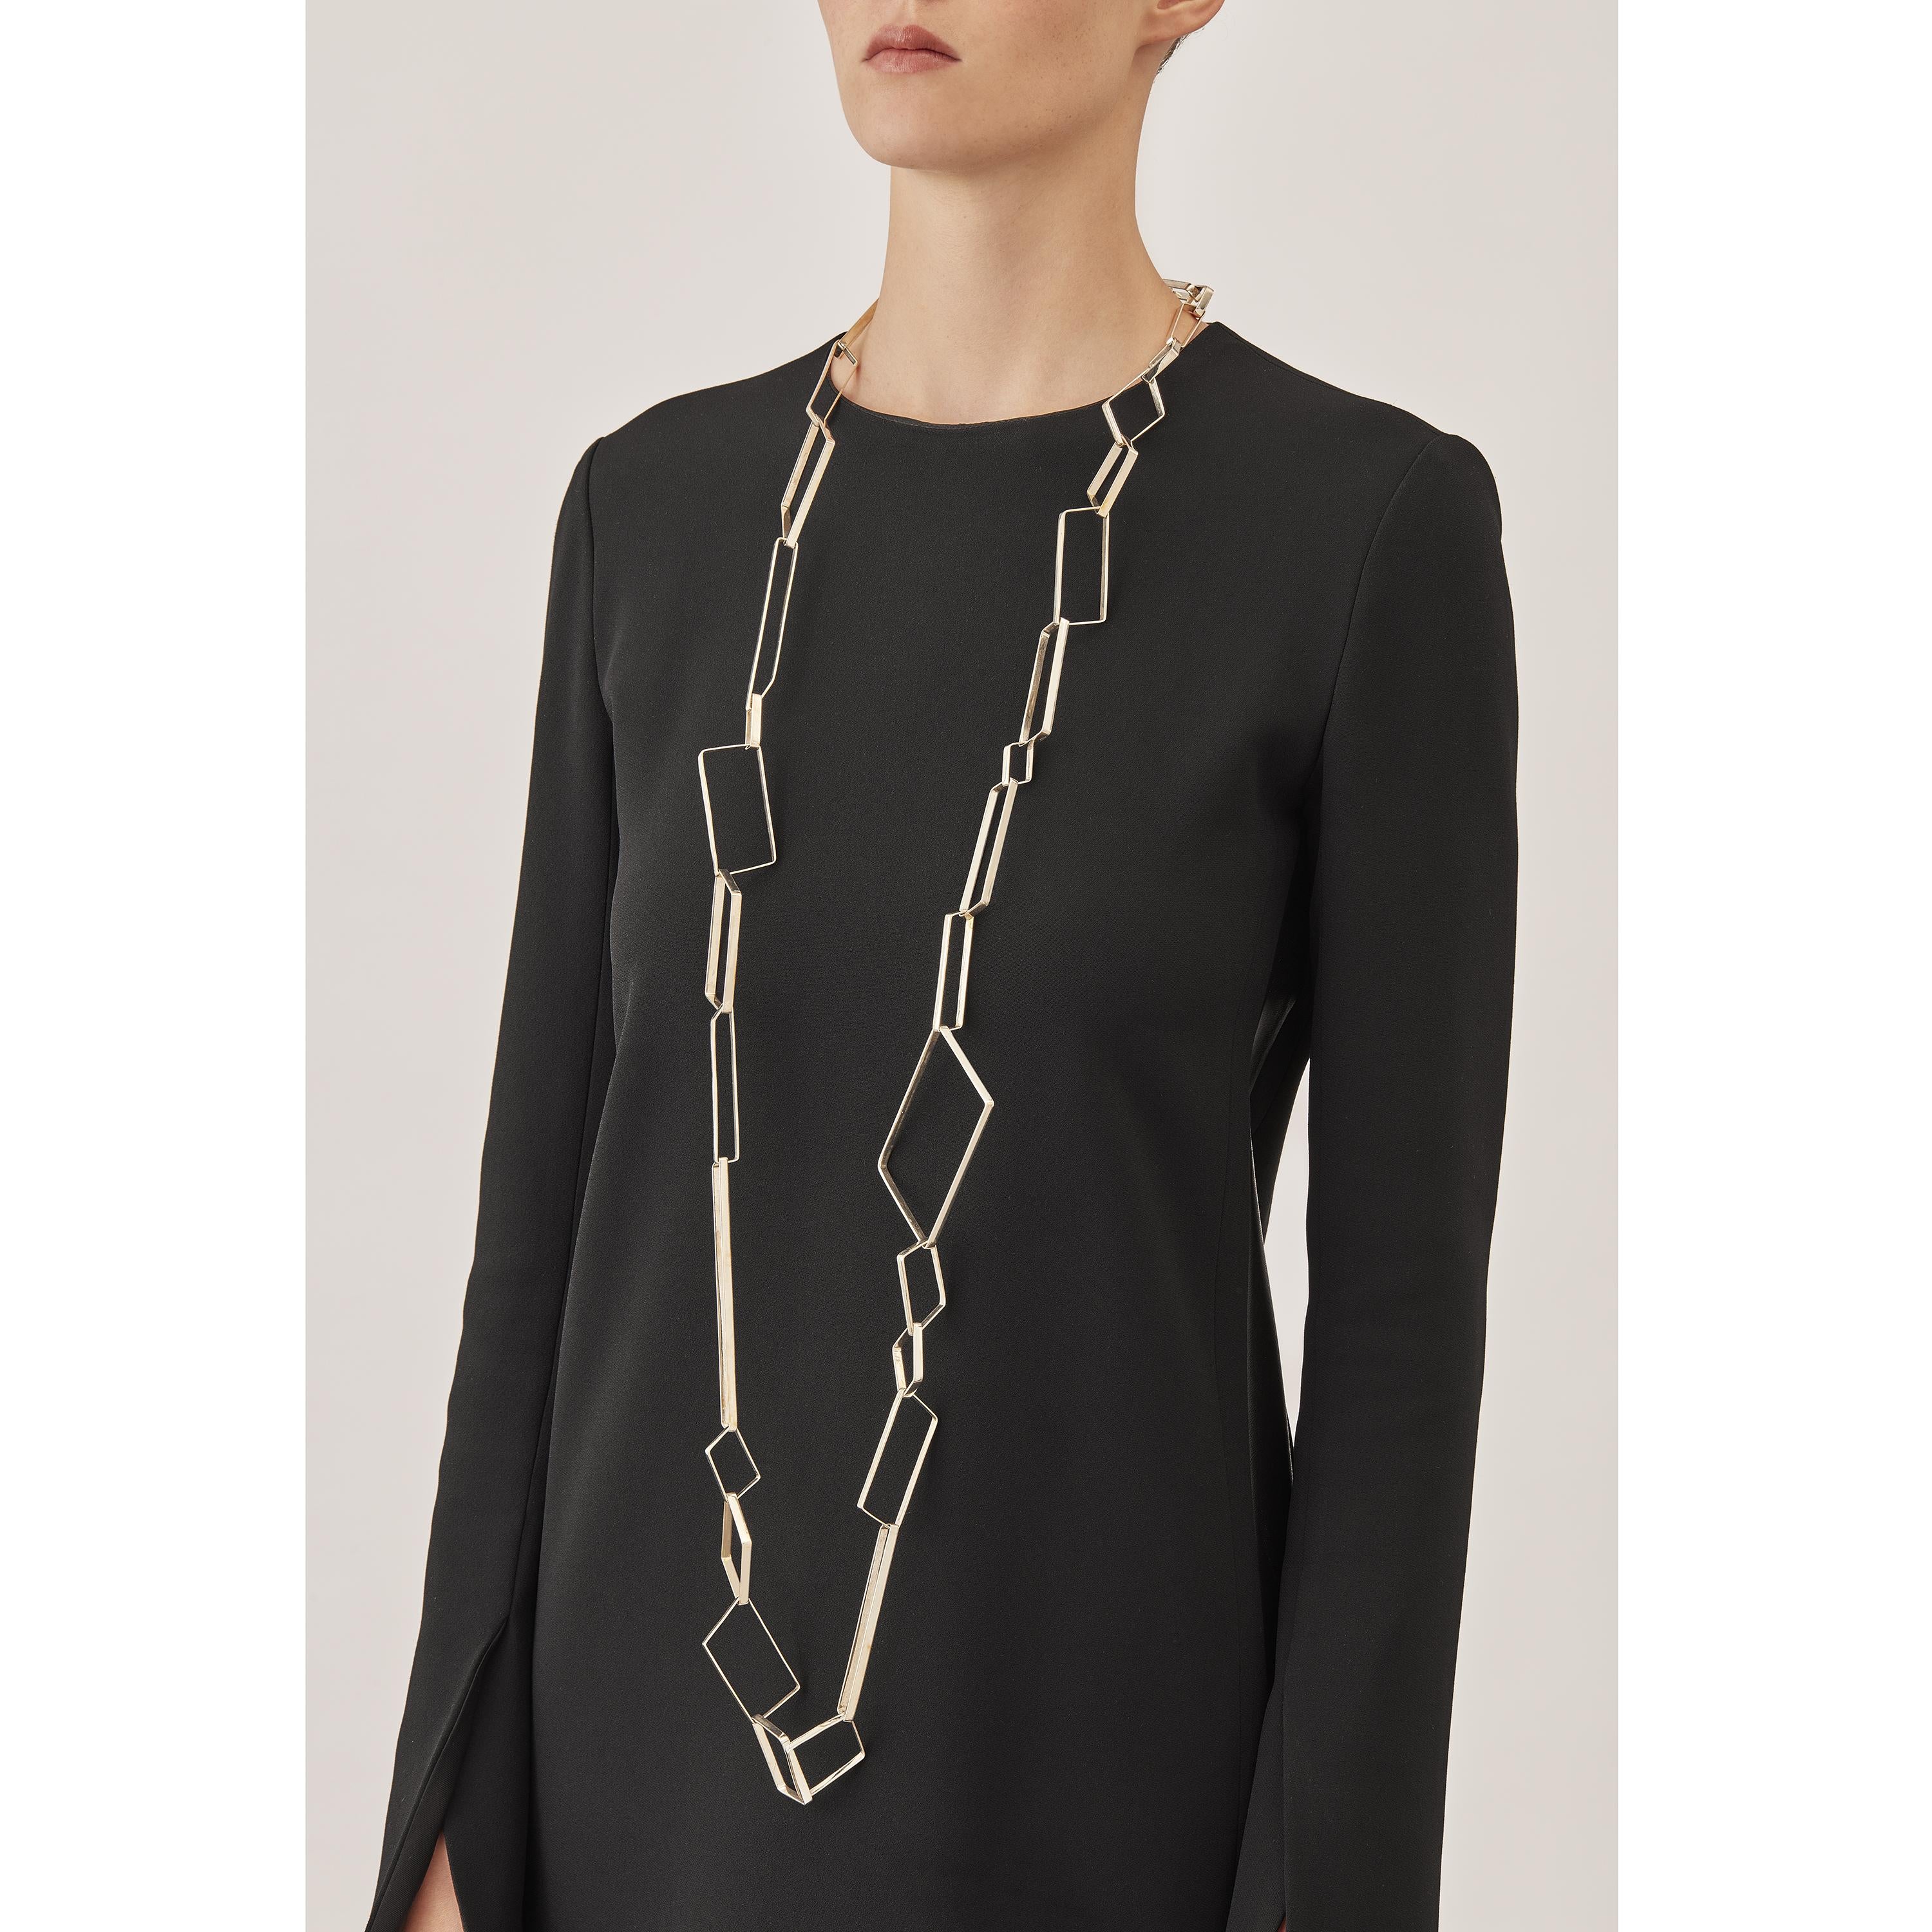 Made by hand in Nathalie Jean's Milan atelier in limited edition, Saphir Infini Long Chain is a contemporary link necklace composed of 34 sterling silver ribbon shapes with rounded edges. The angular configurations of the sapphire’s crystalline